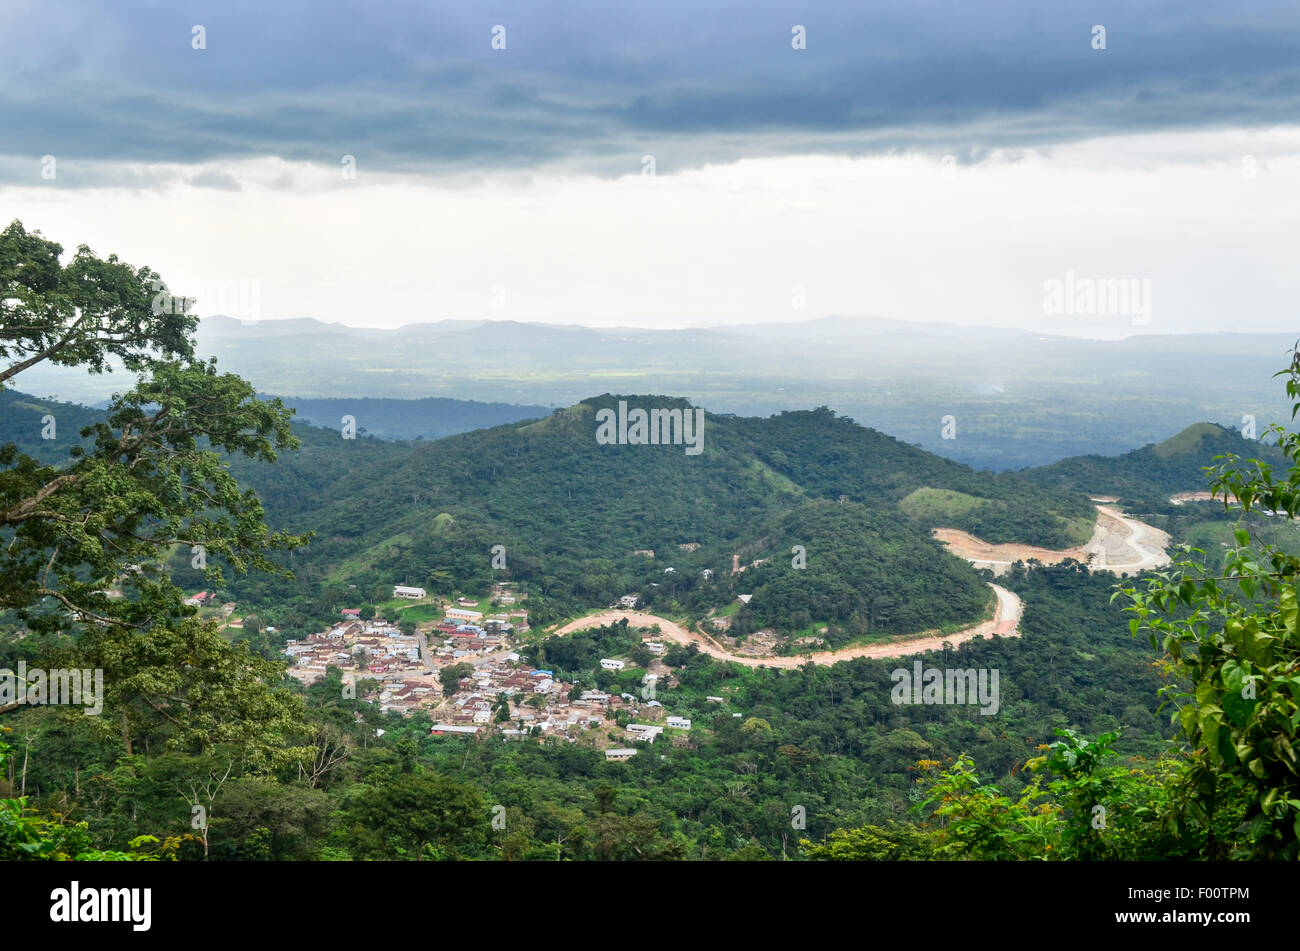 Aerial view of the village north of Vane and south of Biakpa, seen from Amedzofe, in the Volta region, east of Ghana Stock Photo